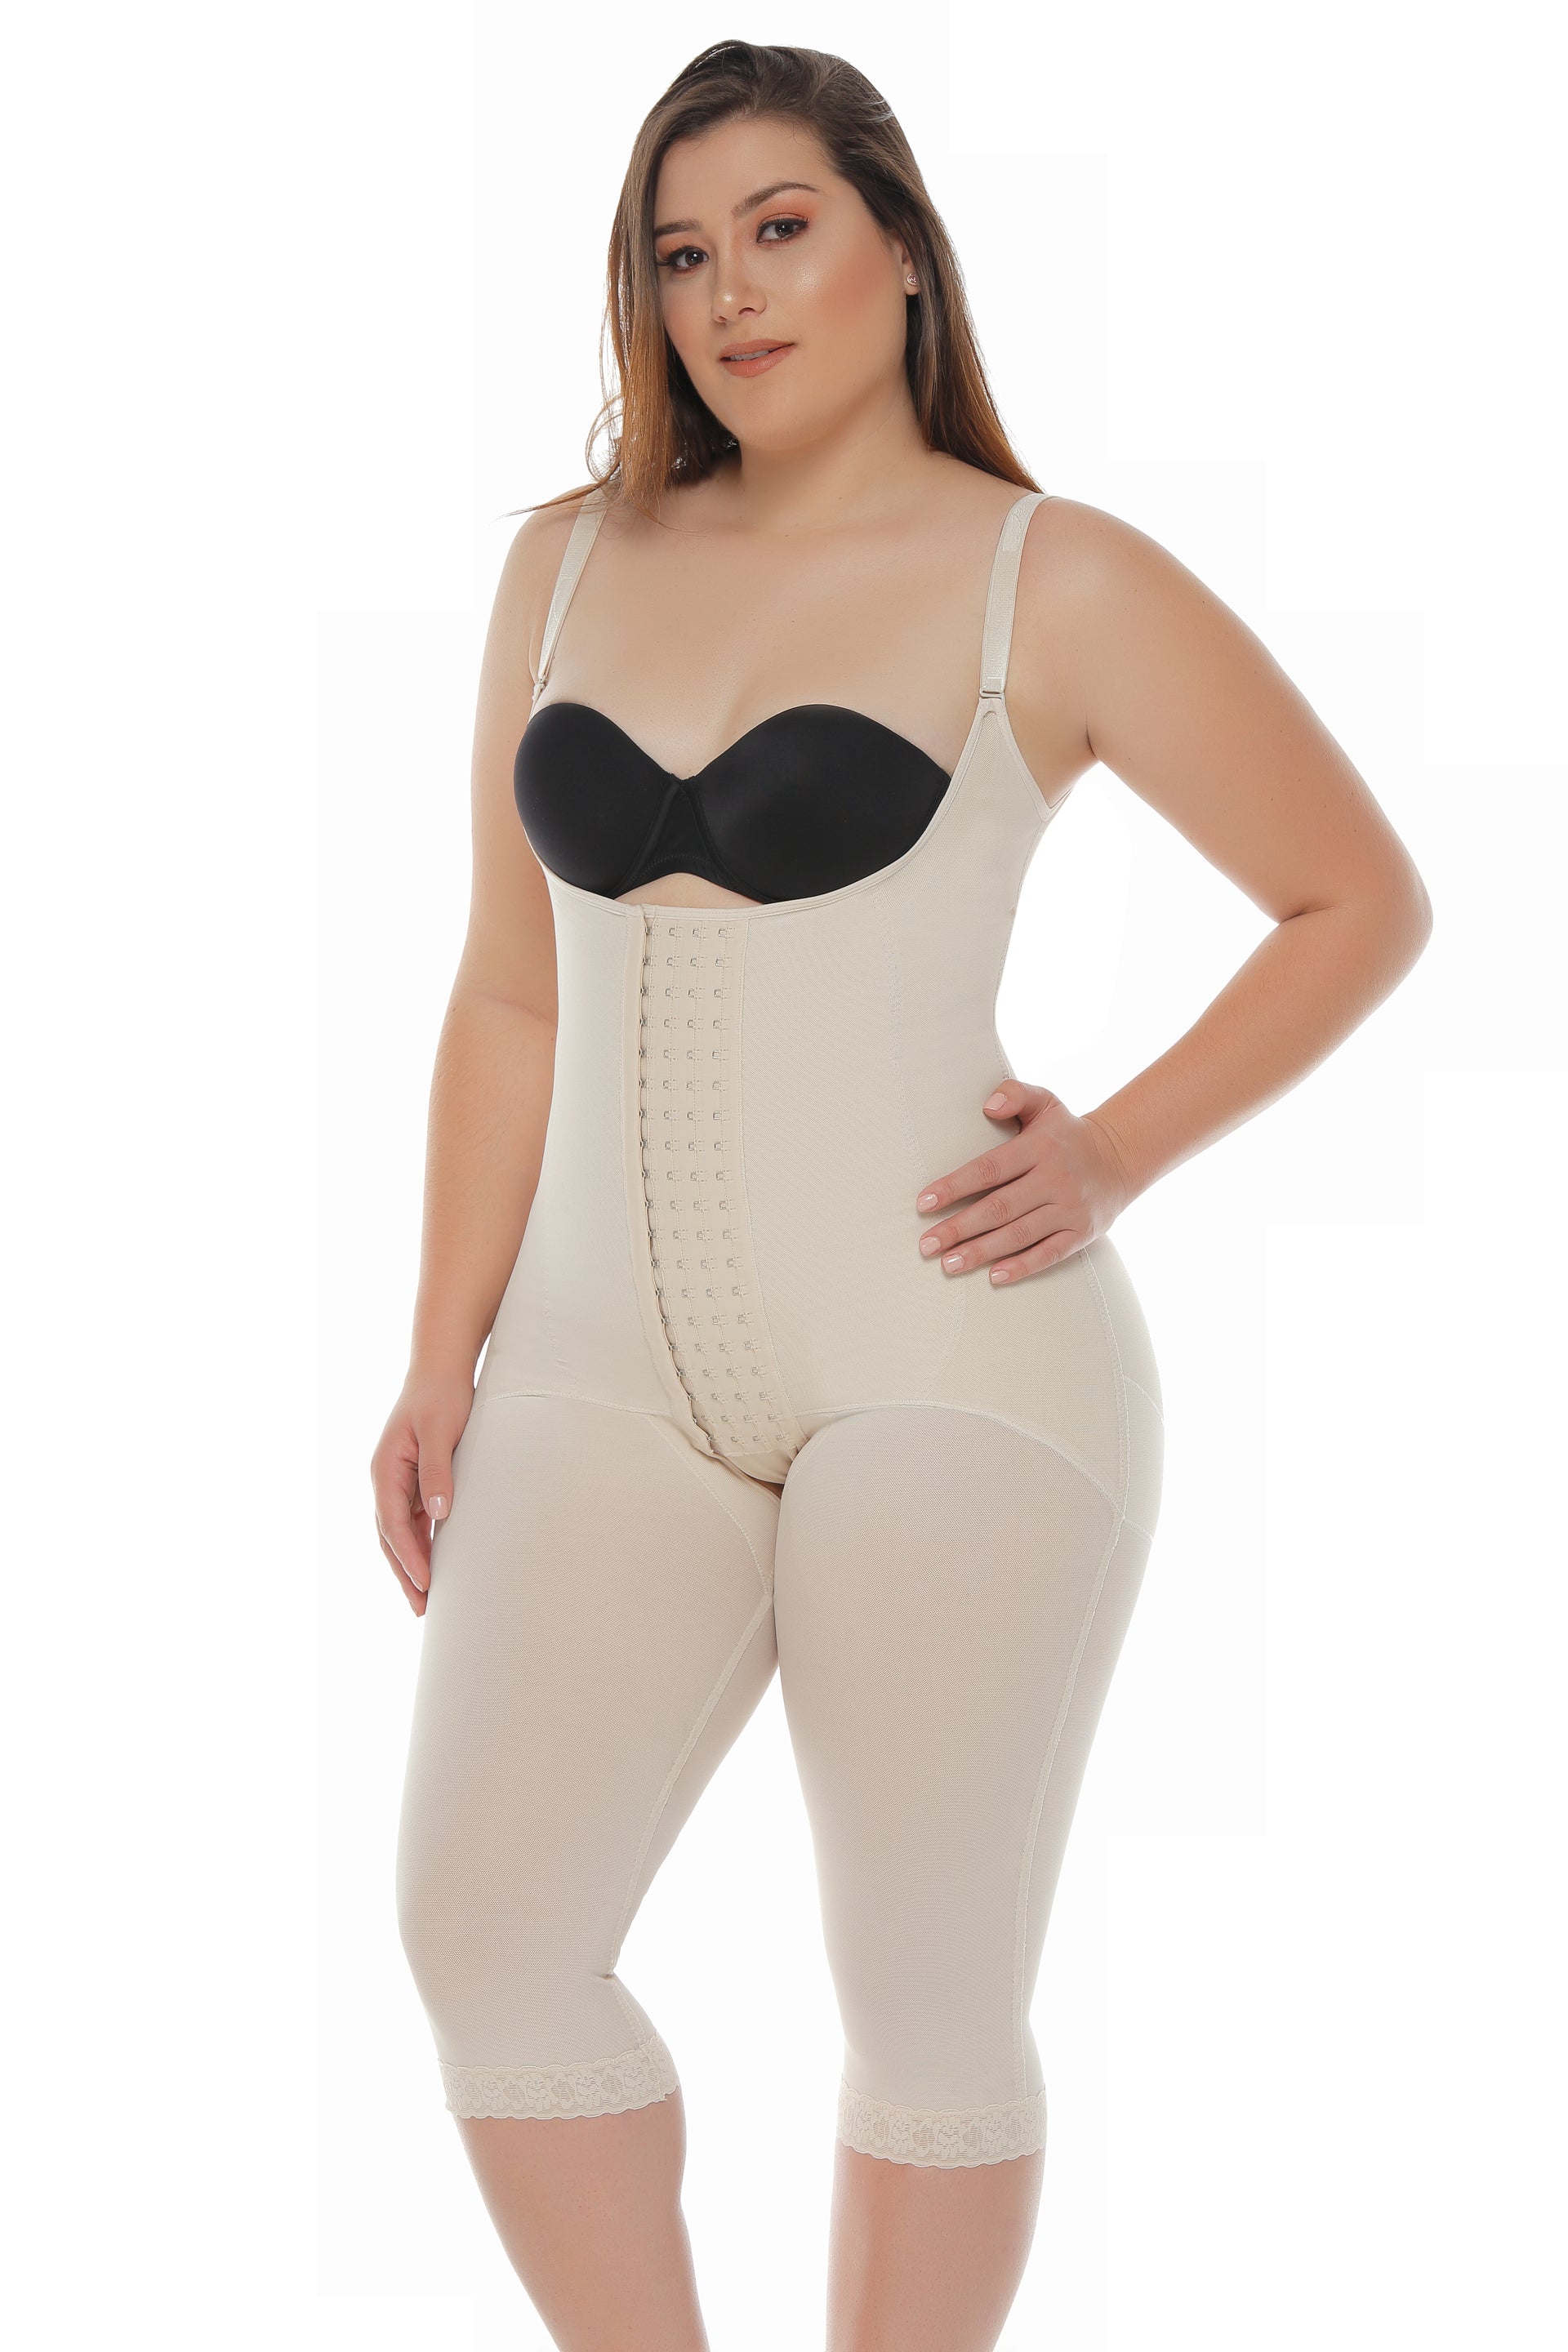 Latin Body Shapers - Look fashionable and feel gorgeous wherever